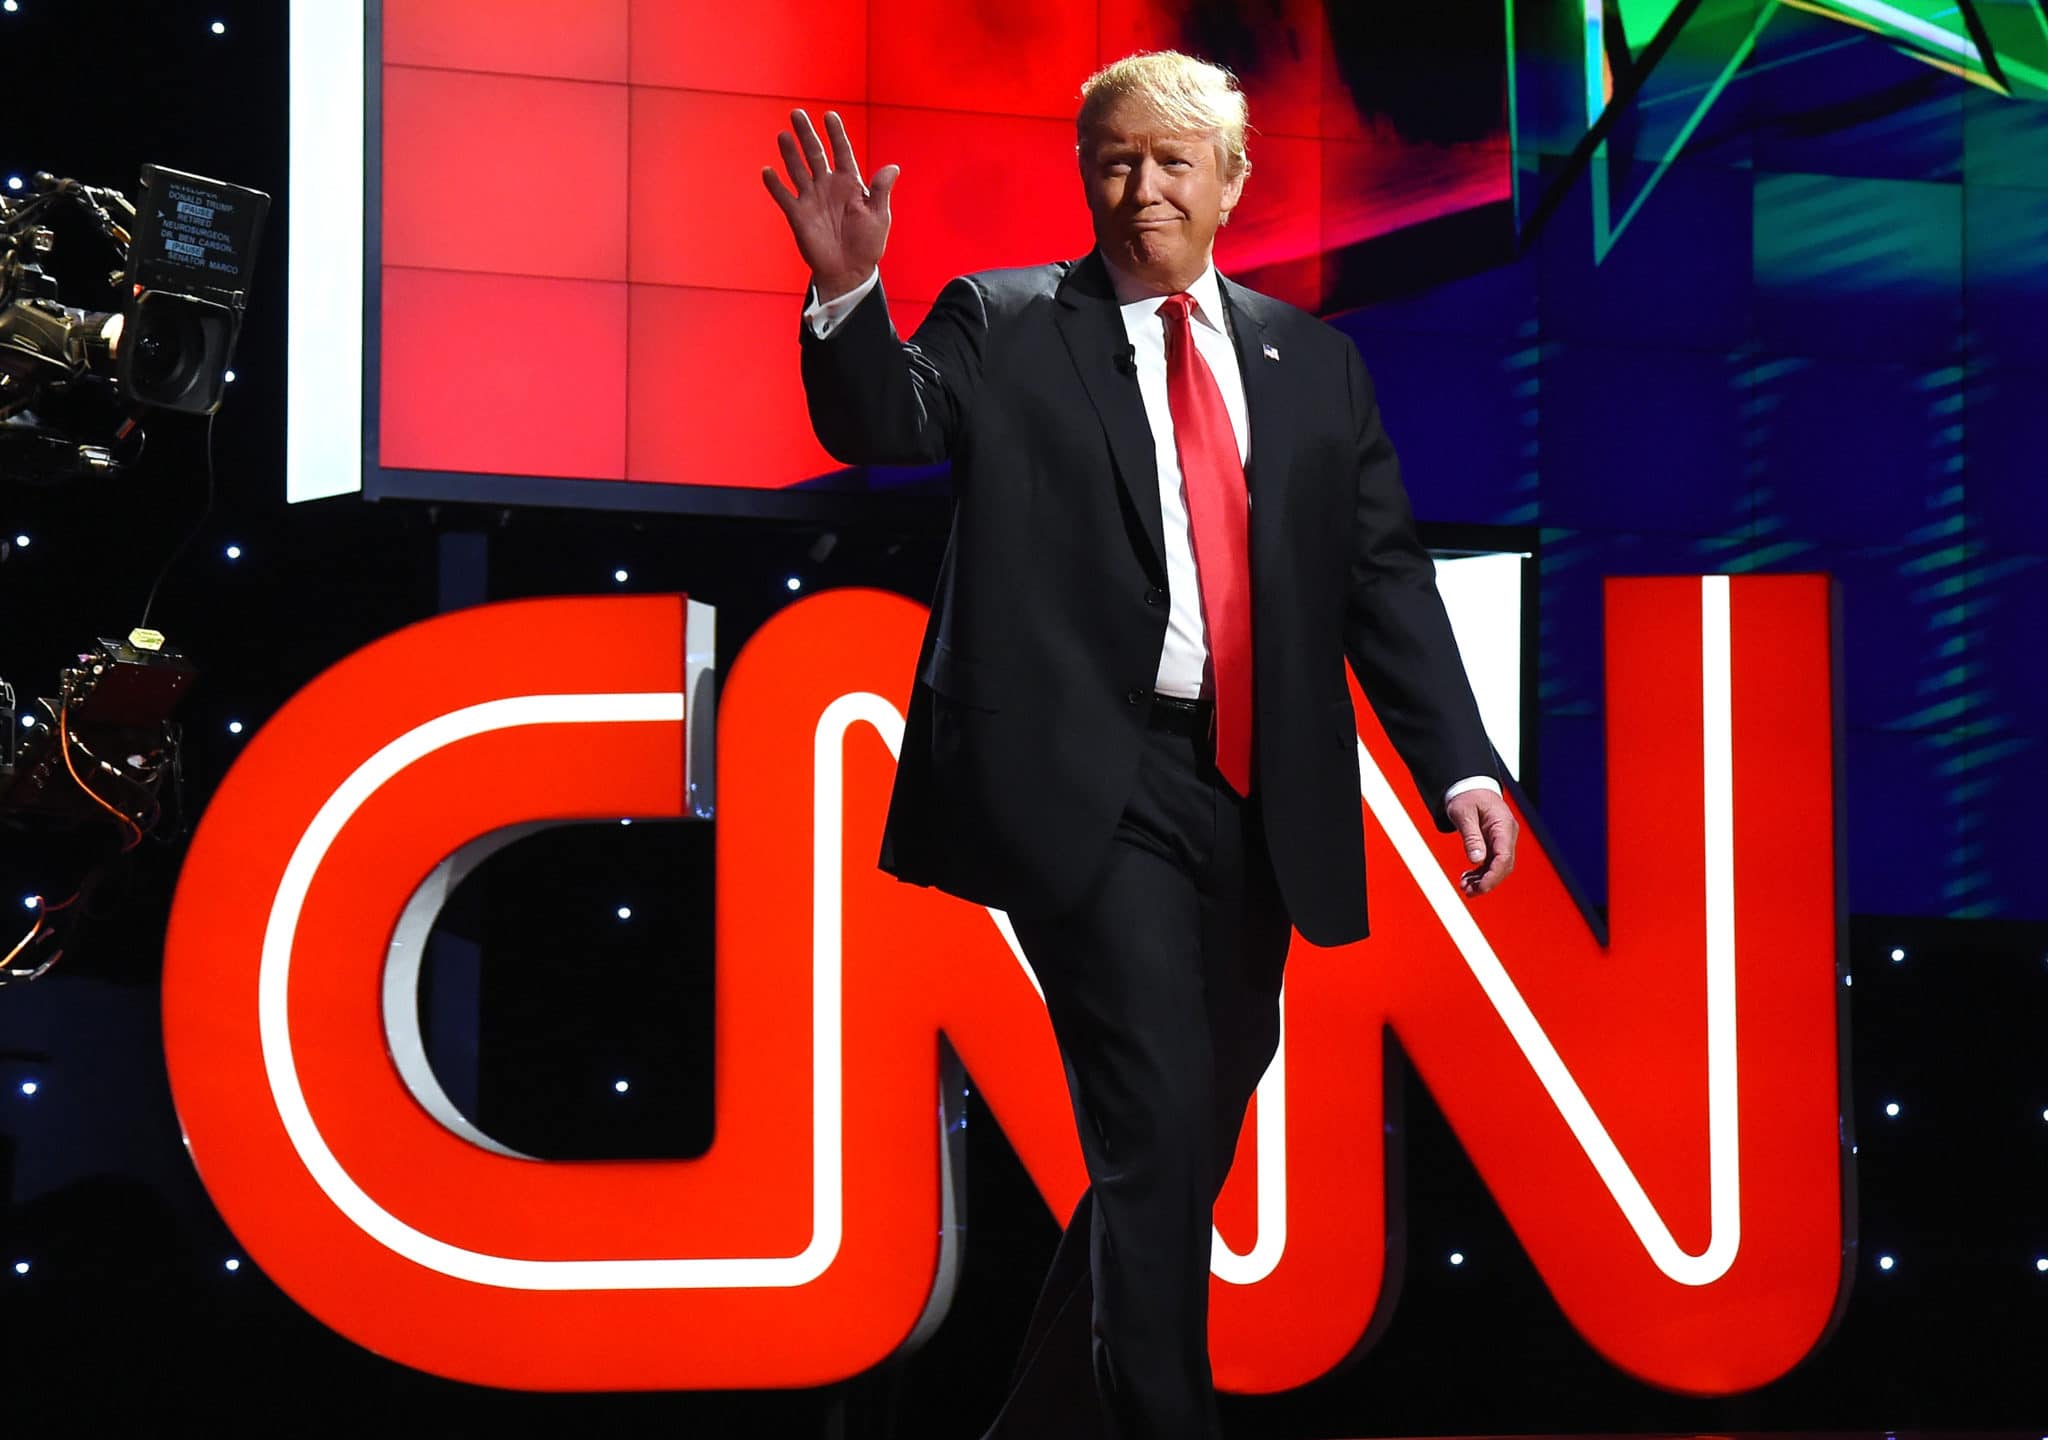 CNN and MSNBC See Ratings Plunge as Networks No Longer Have Trump to Cover